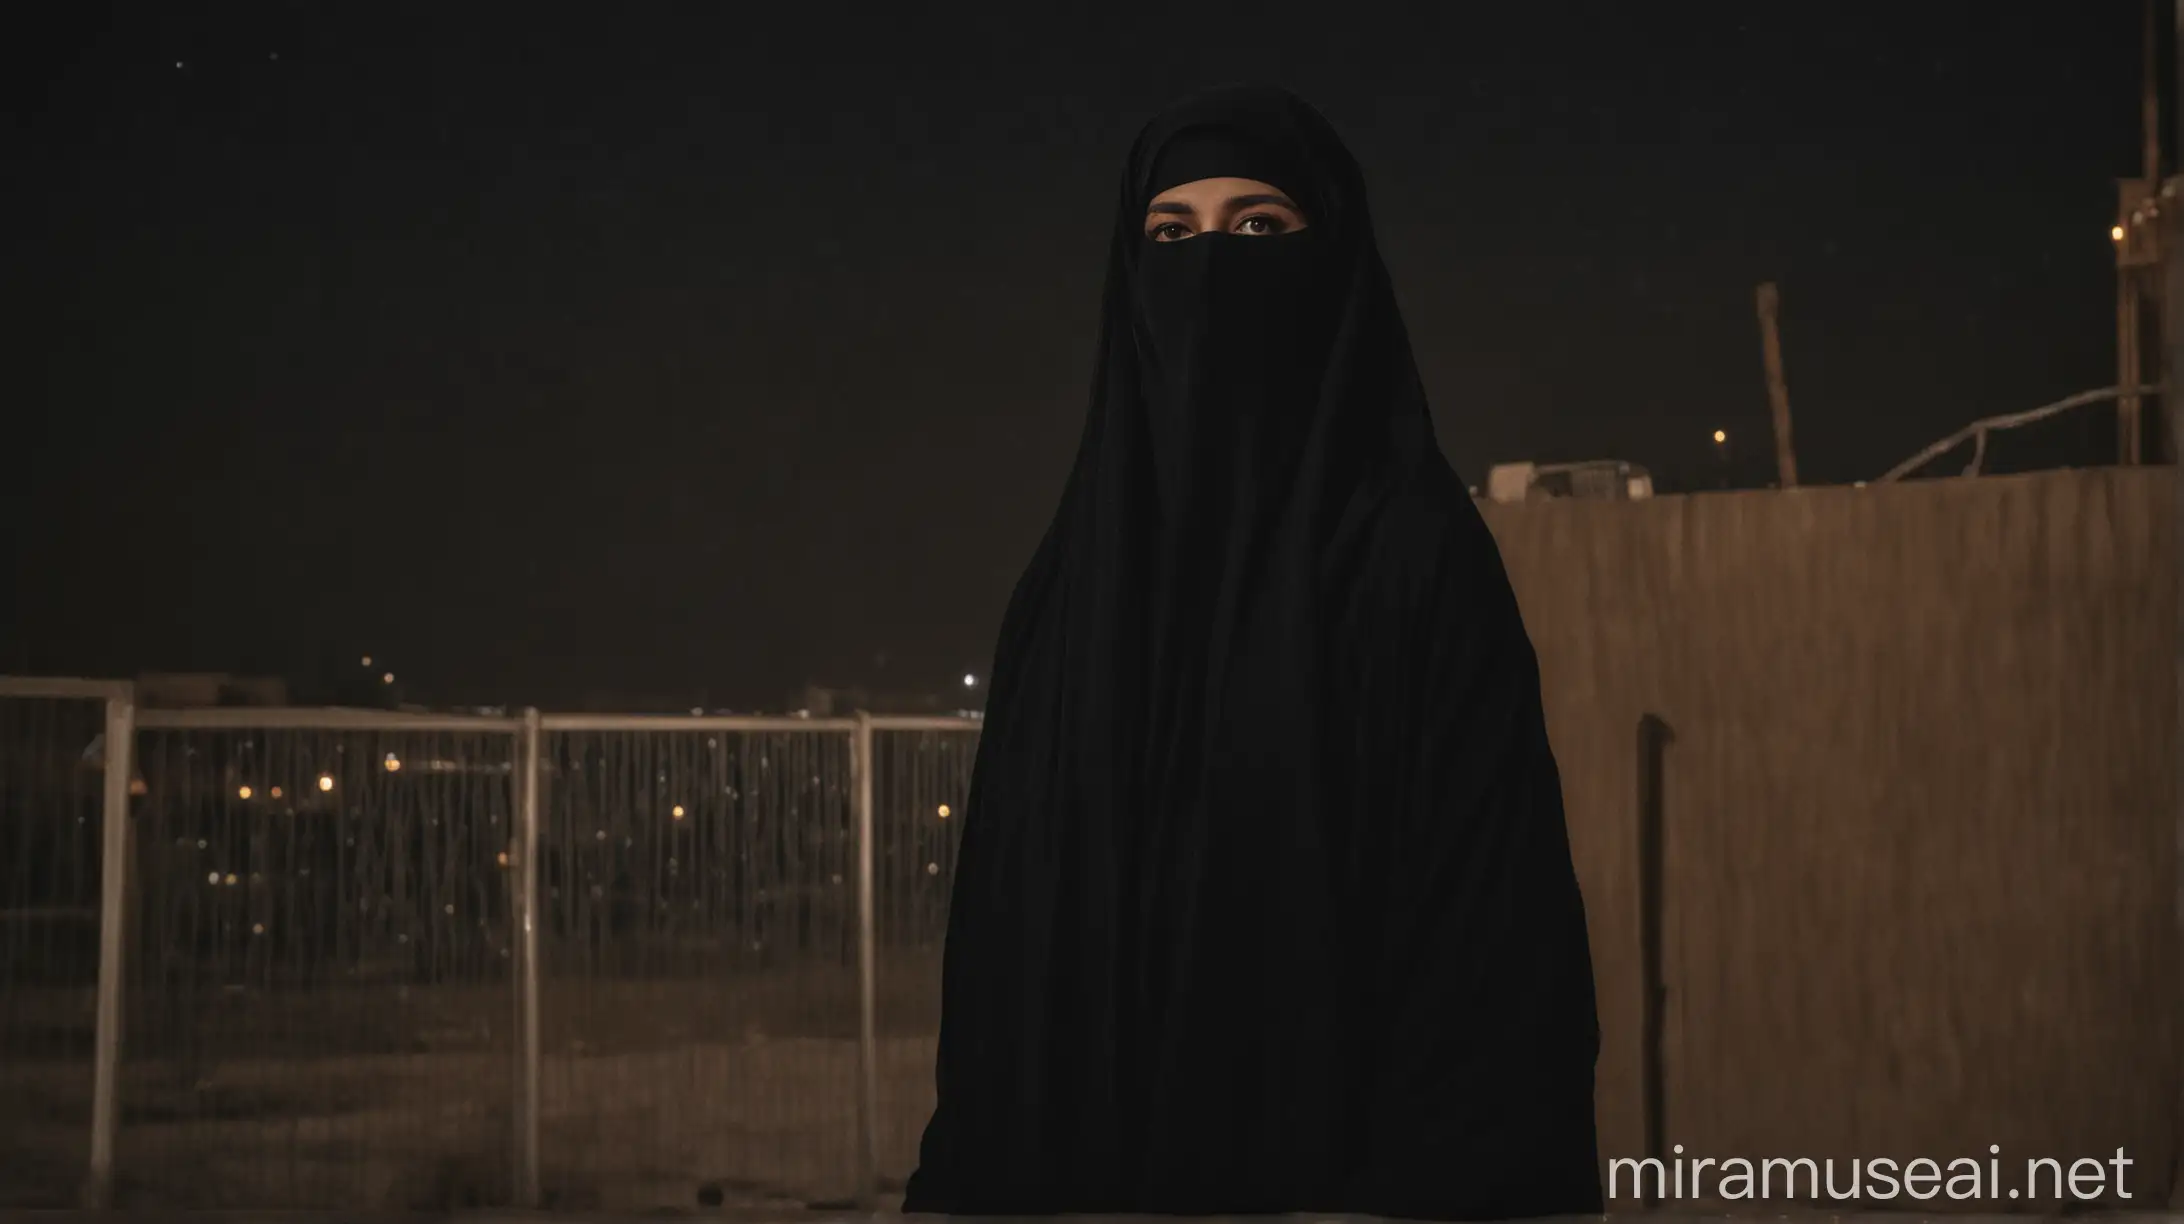 a woman in burkha standing outside at night
